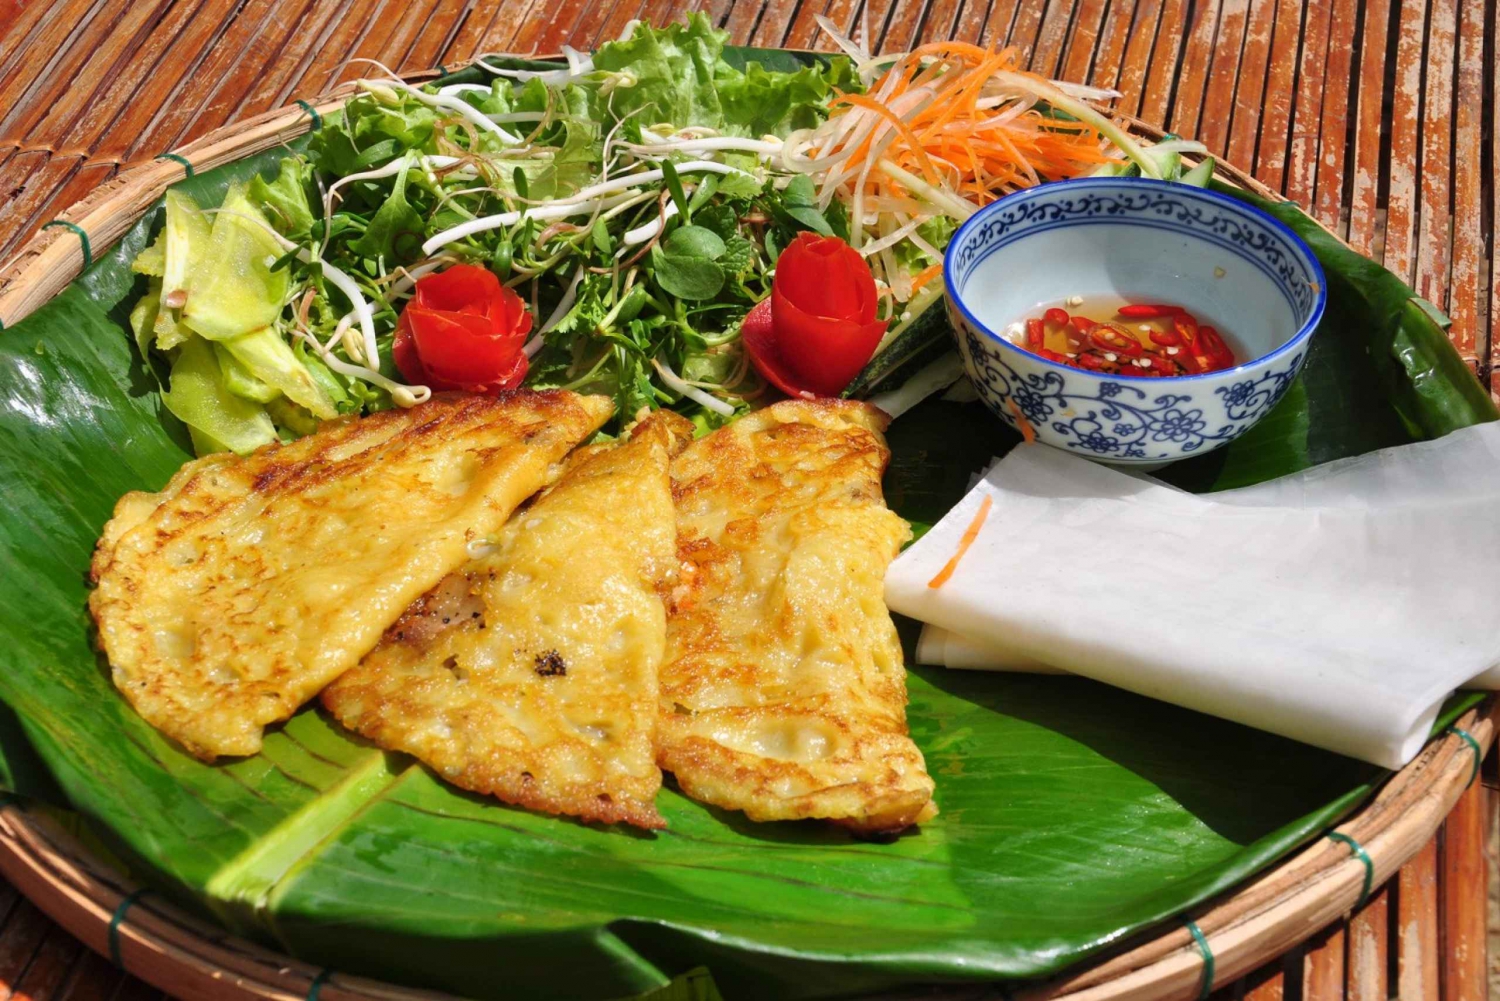 Hoi An: Grandma's Home Cooking Class with Market Tour